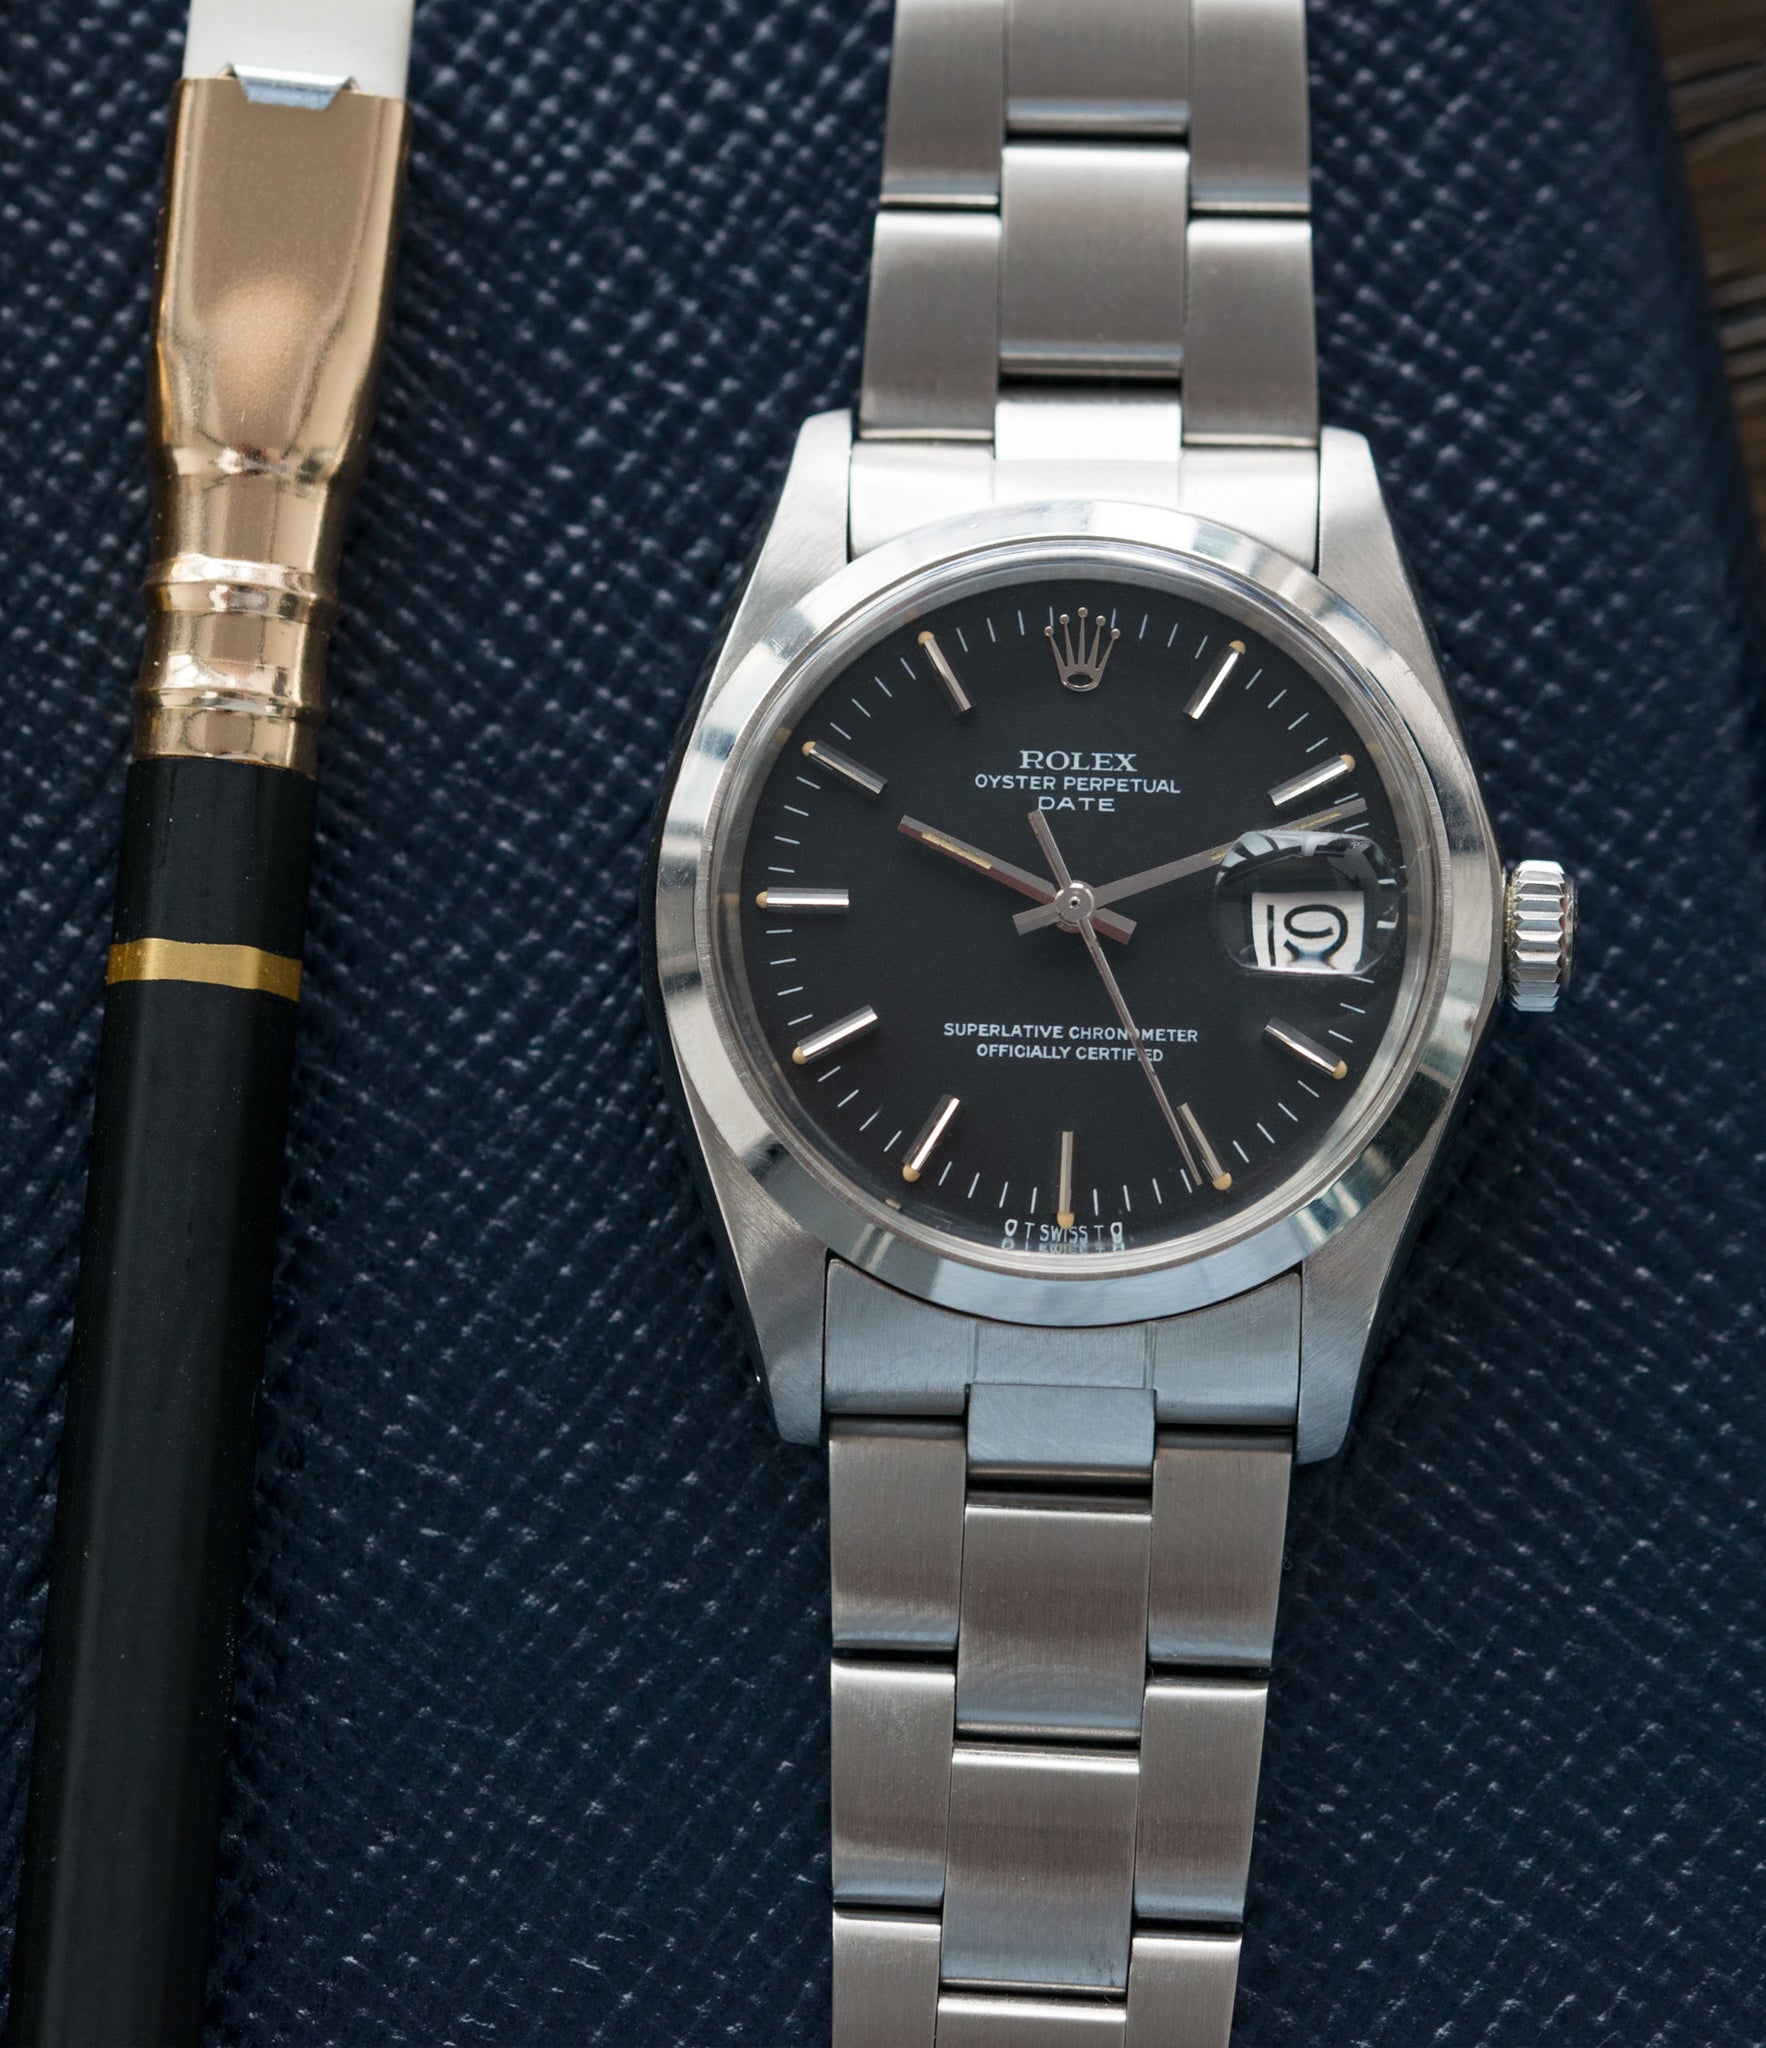 Rolex 1500 steel black sigma dial date sports vintage watch for sale online at A Collected Man vintage watch specialist